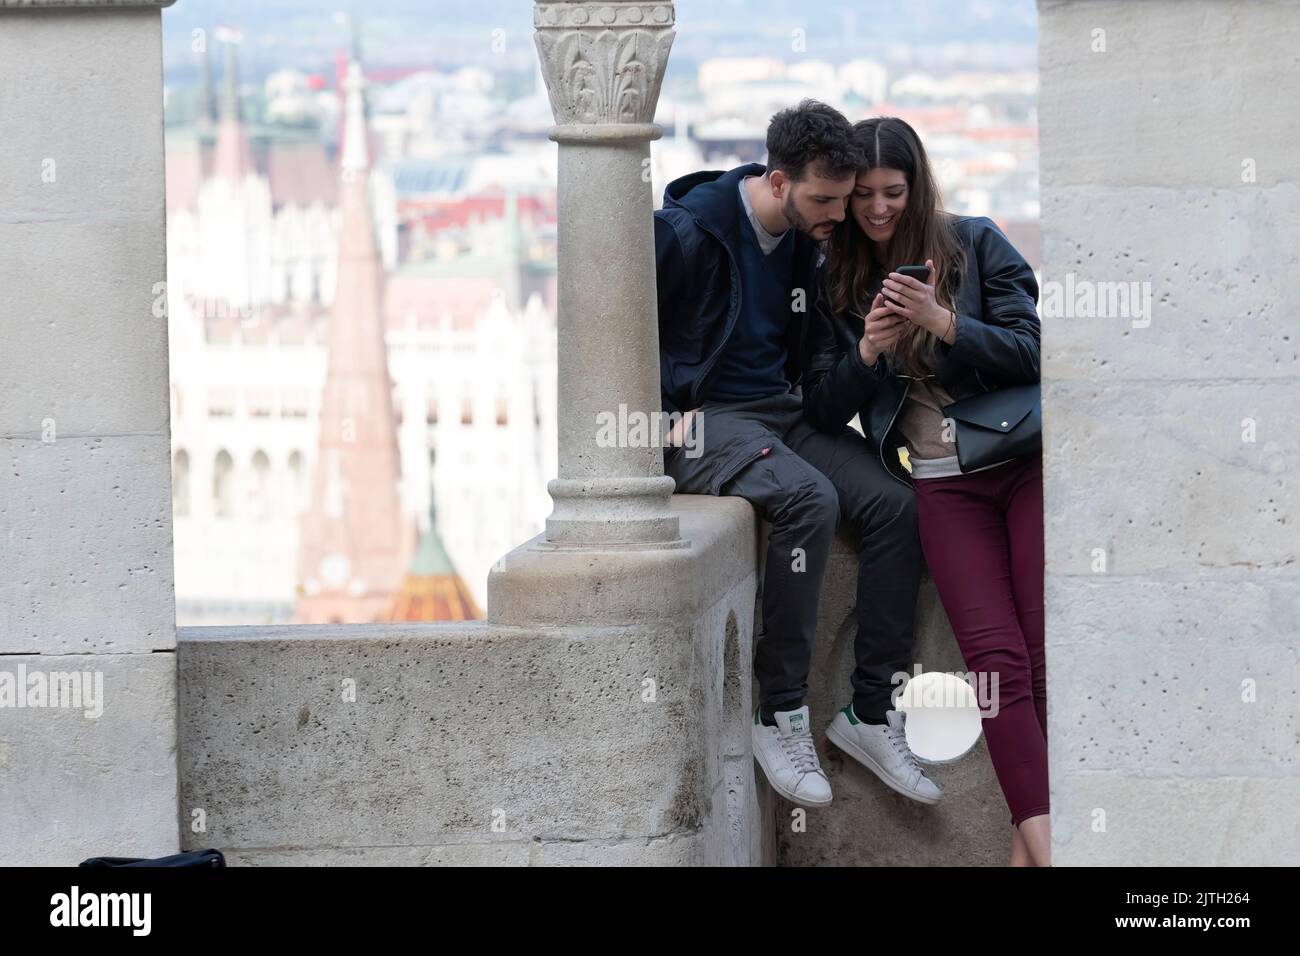 Young couple enjoying photos taken on their mobile device at a scenic view over Danube River Stock Photo